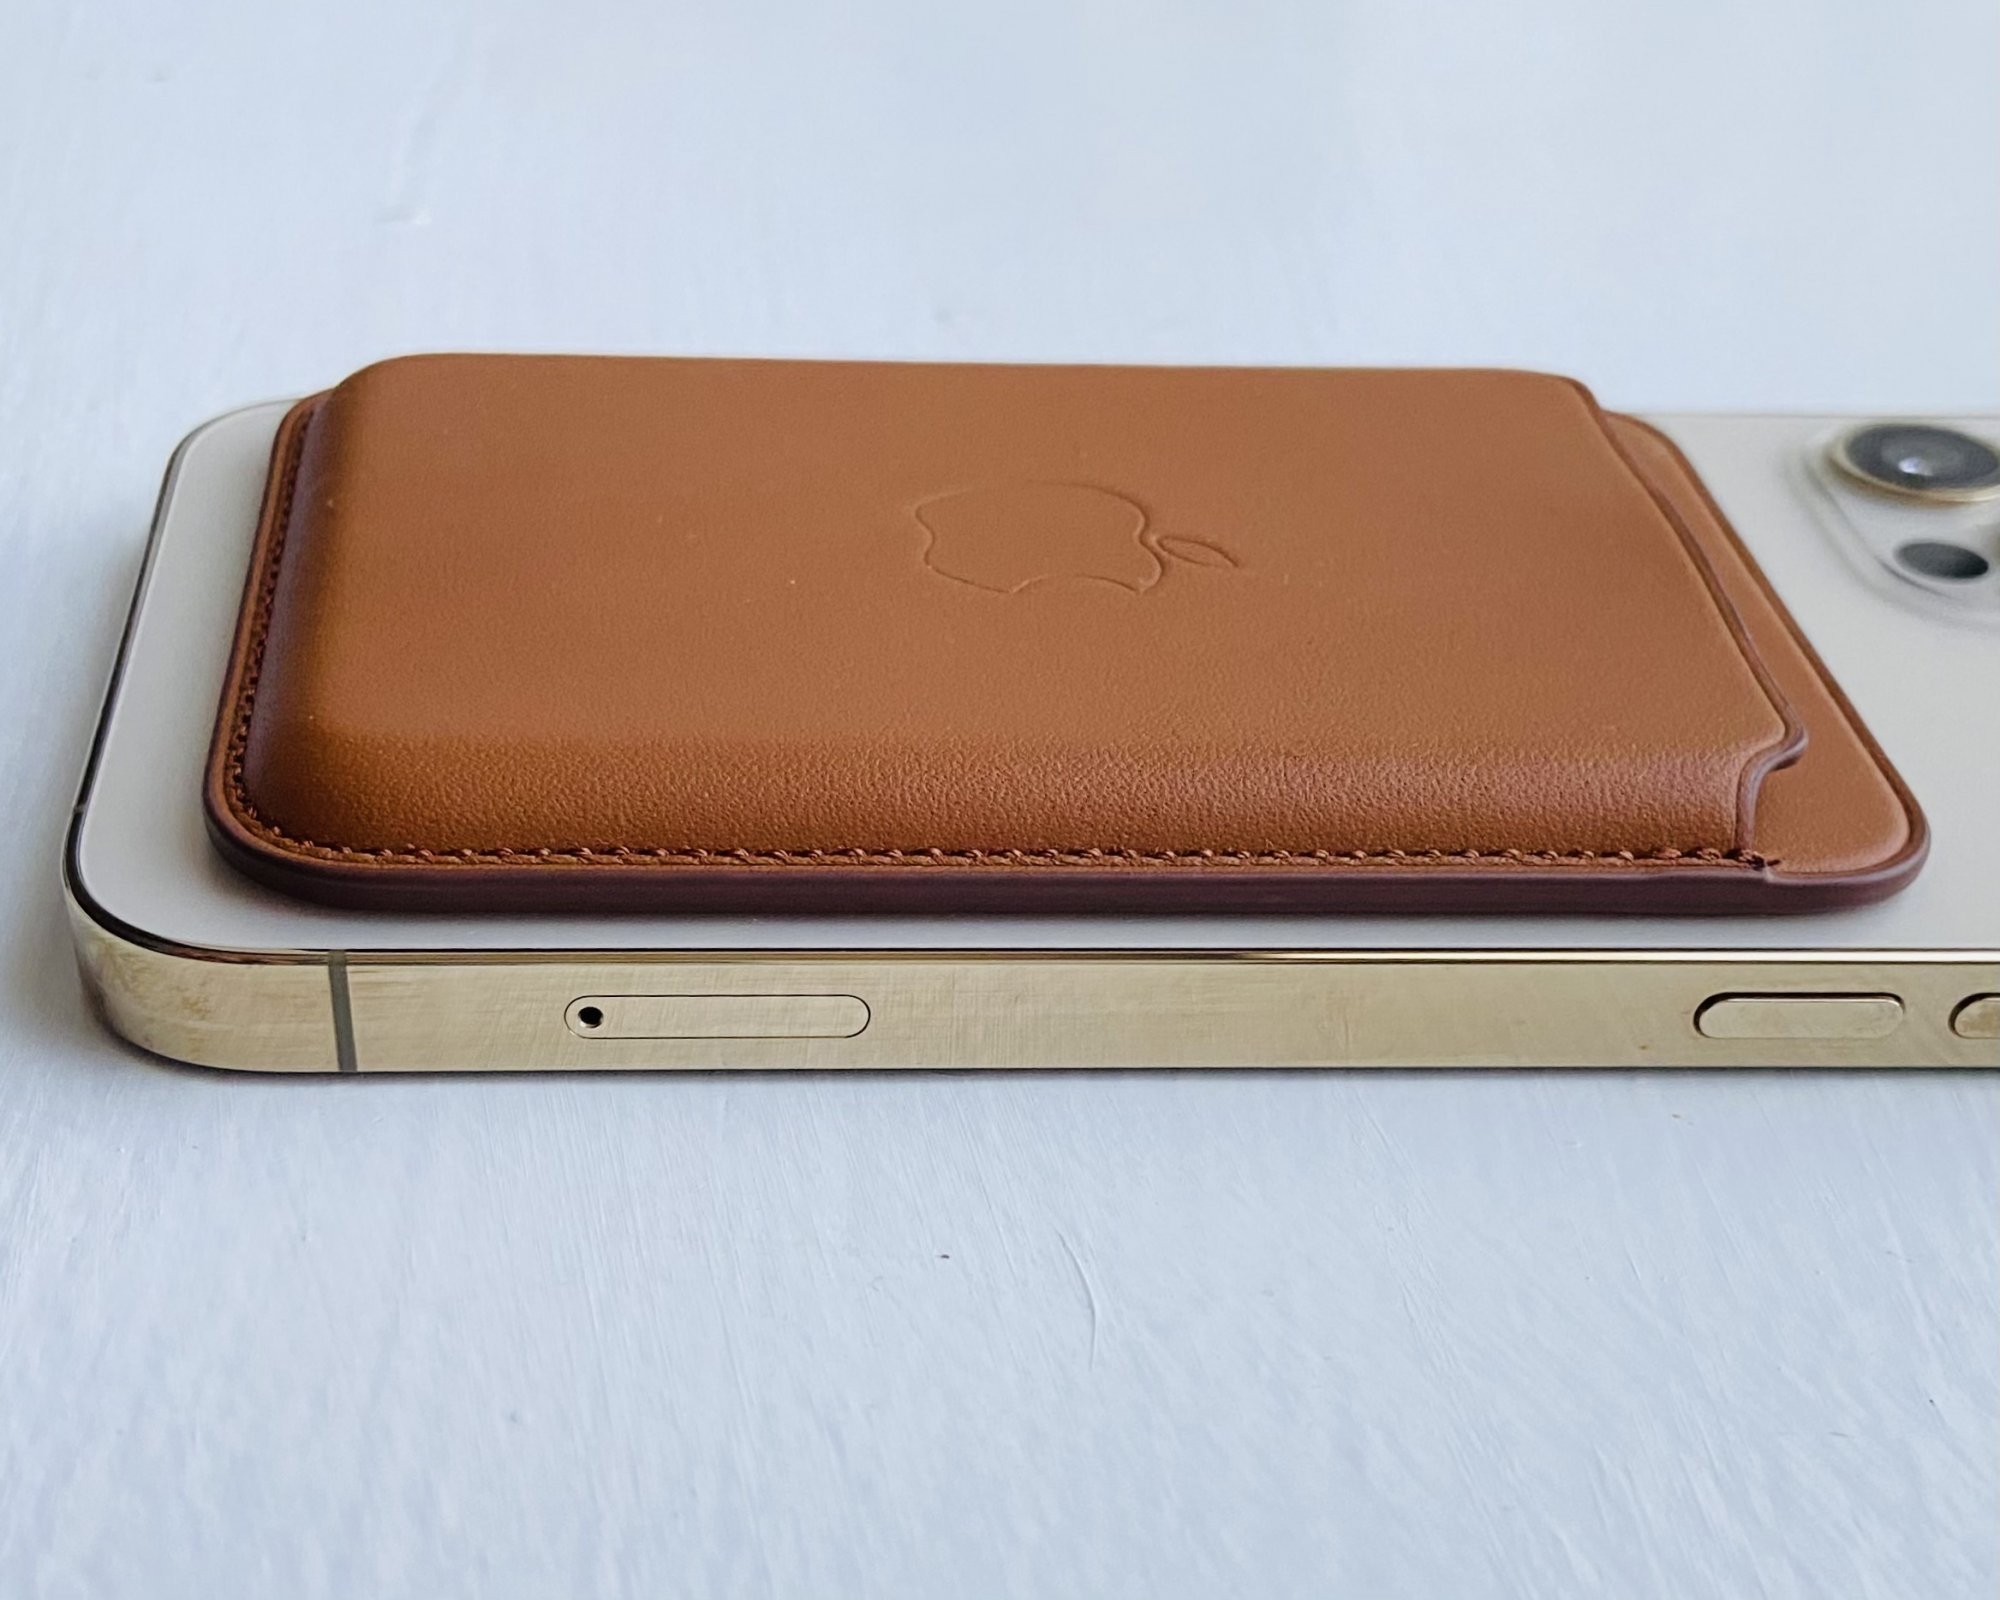 Apple Leather Wallet - Order Thread | Page 12 | MacRumors Forums